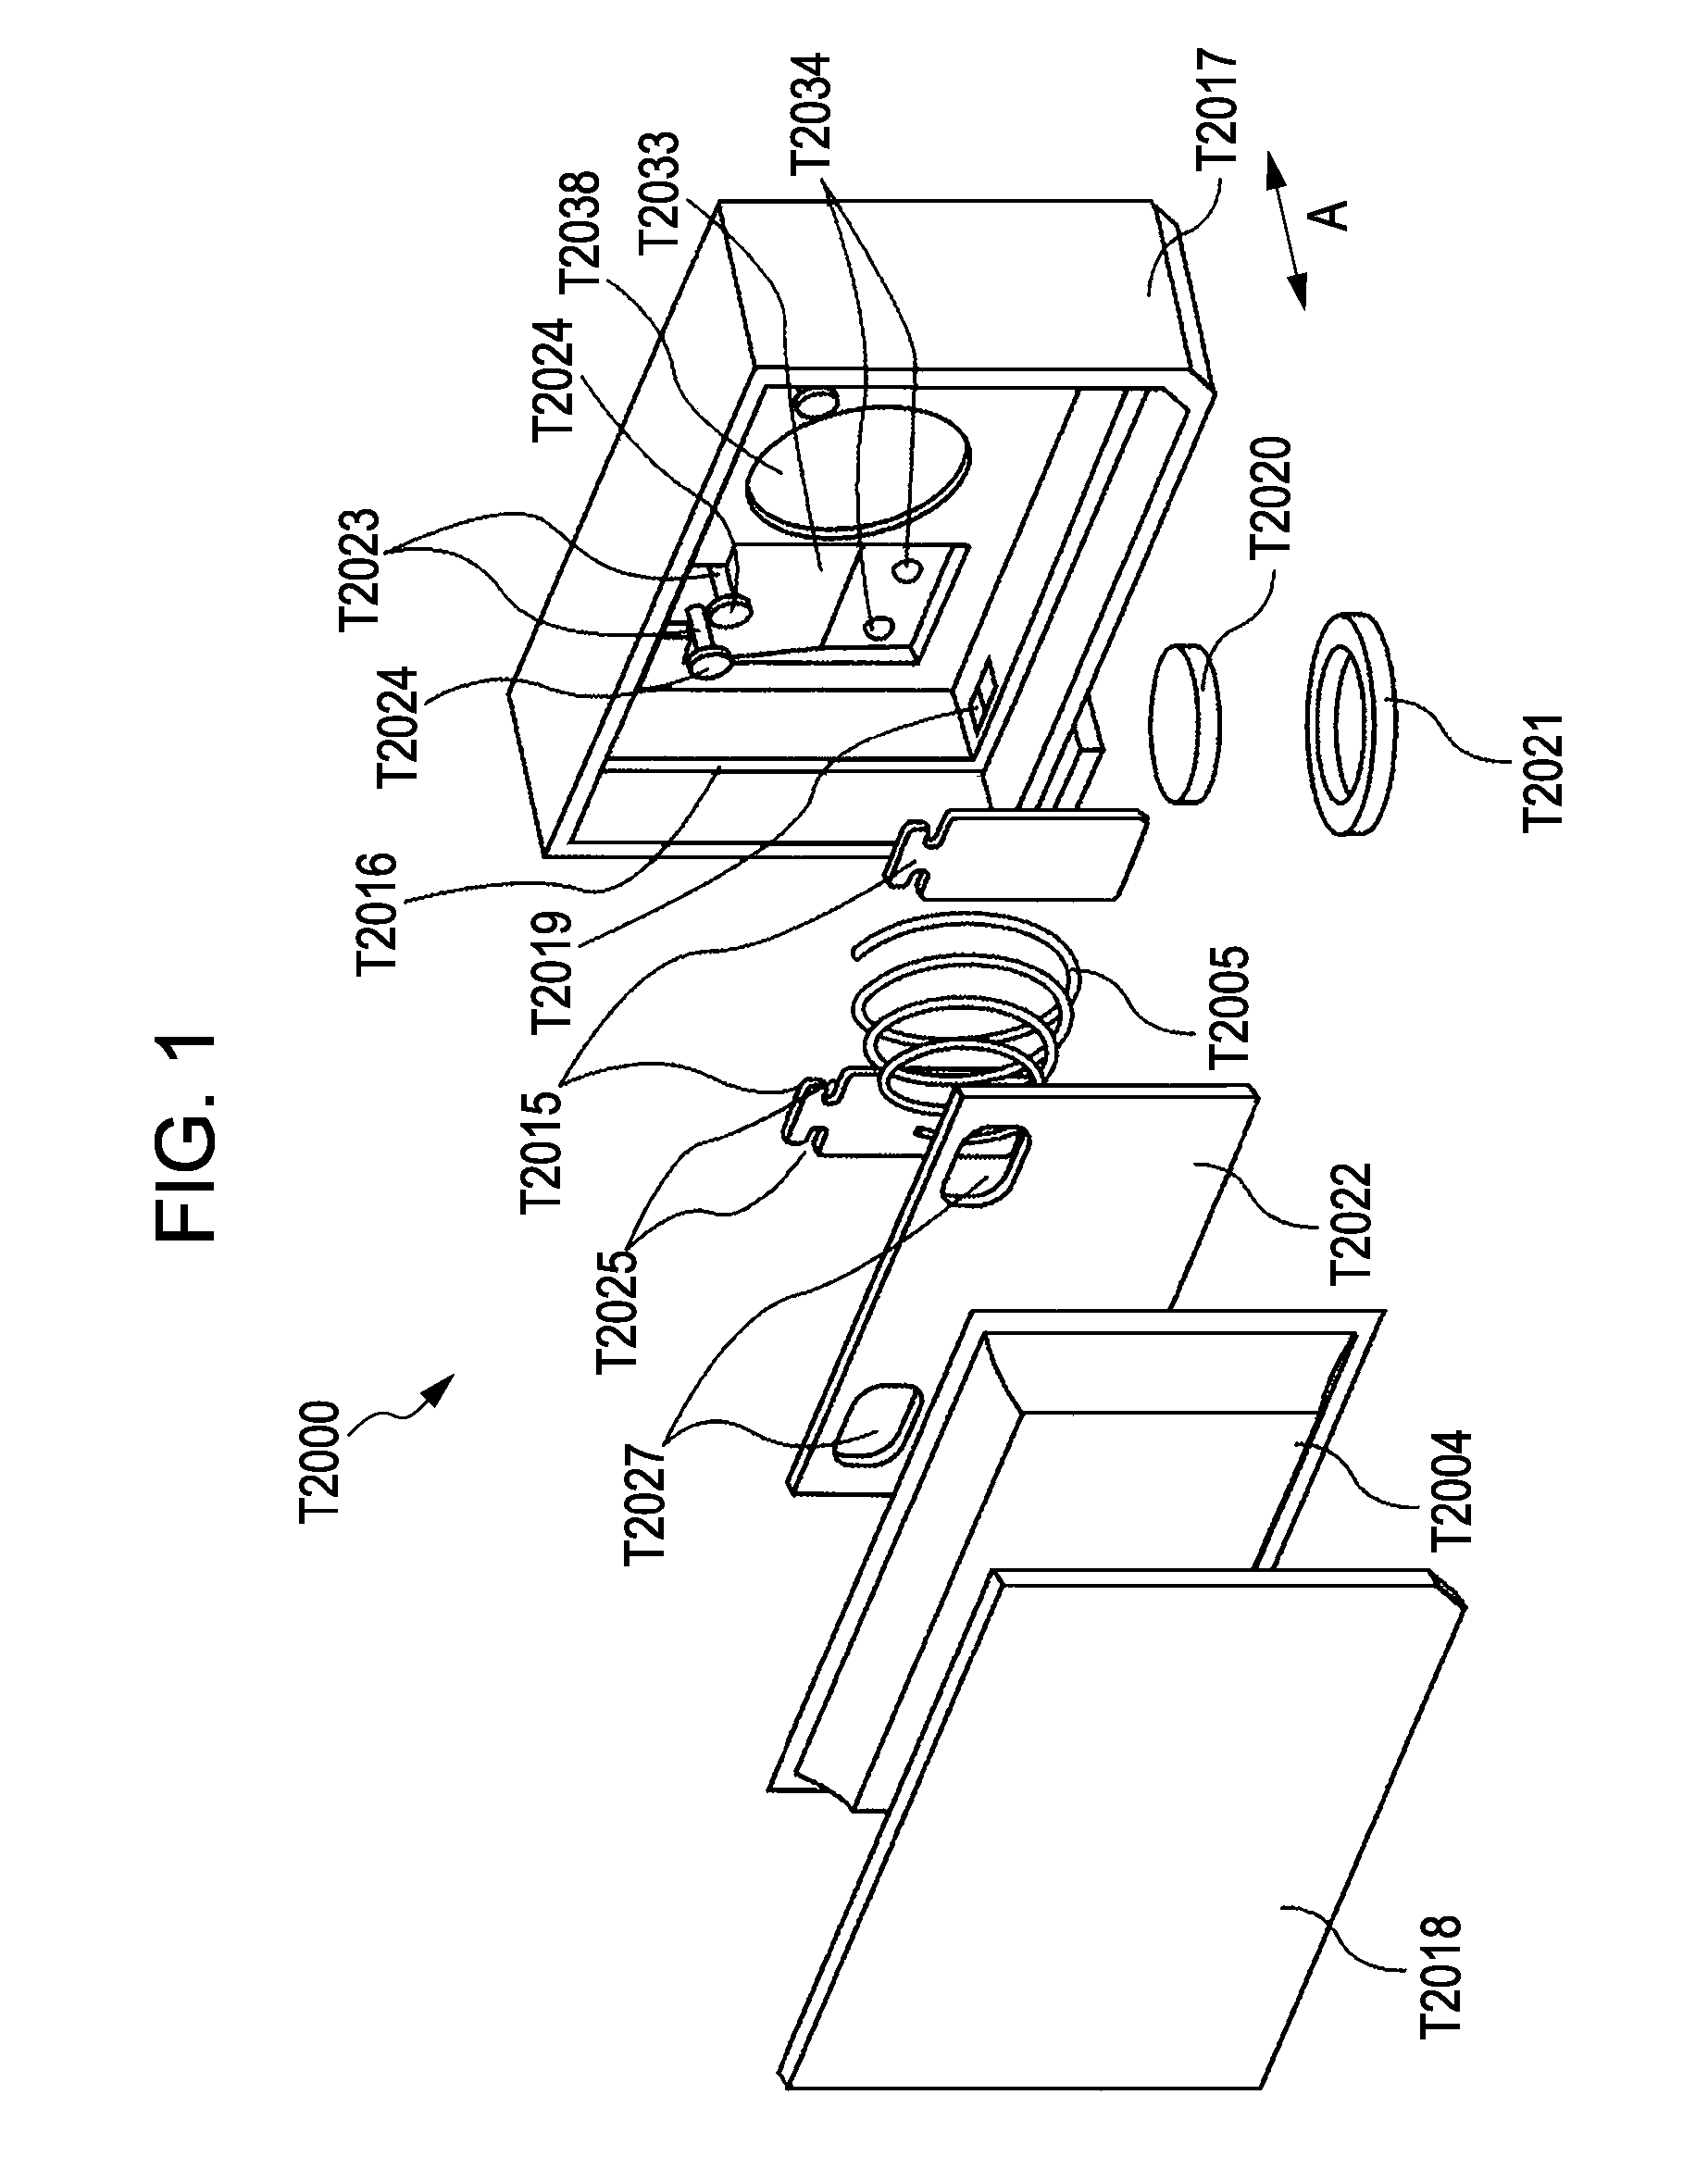 Ink tank and recording apparatus